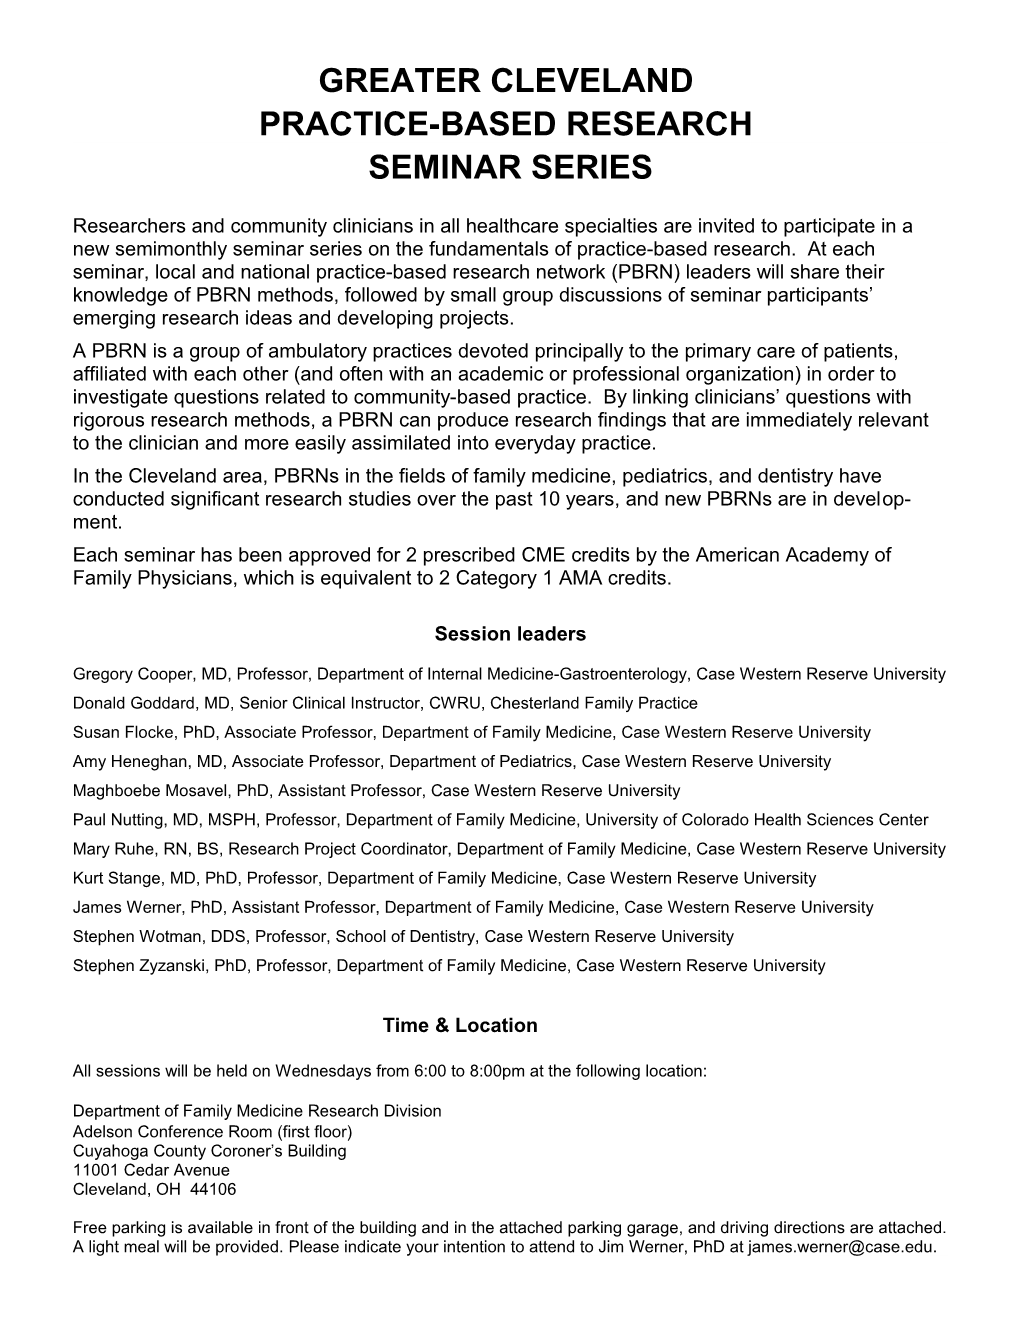 Greater Cleveland Practice-Based Research Seminar Series